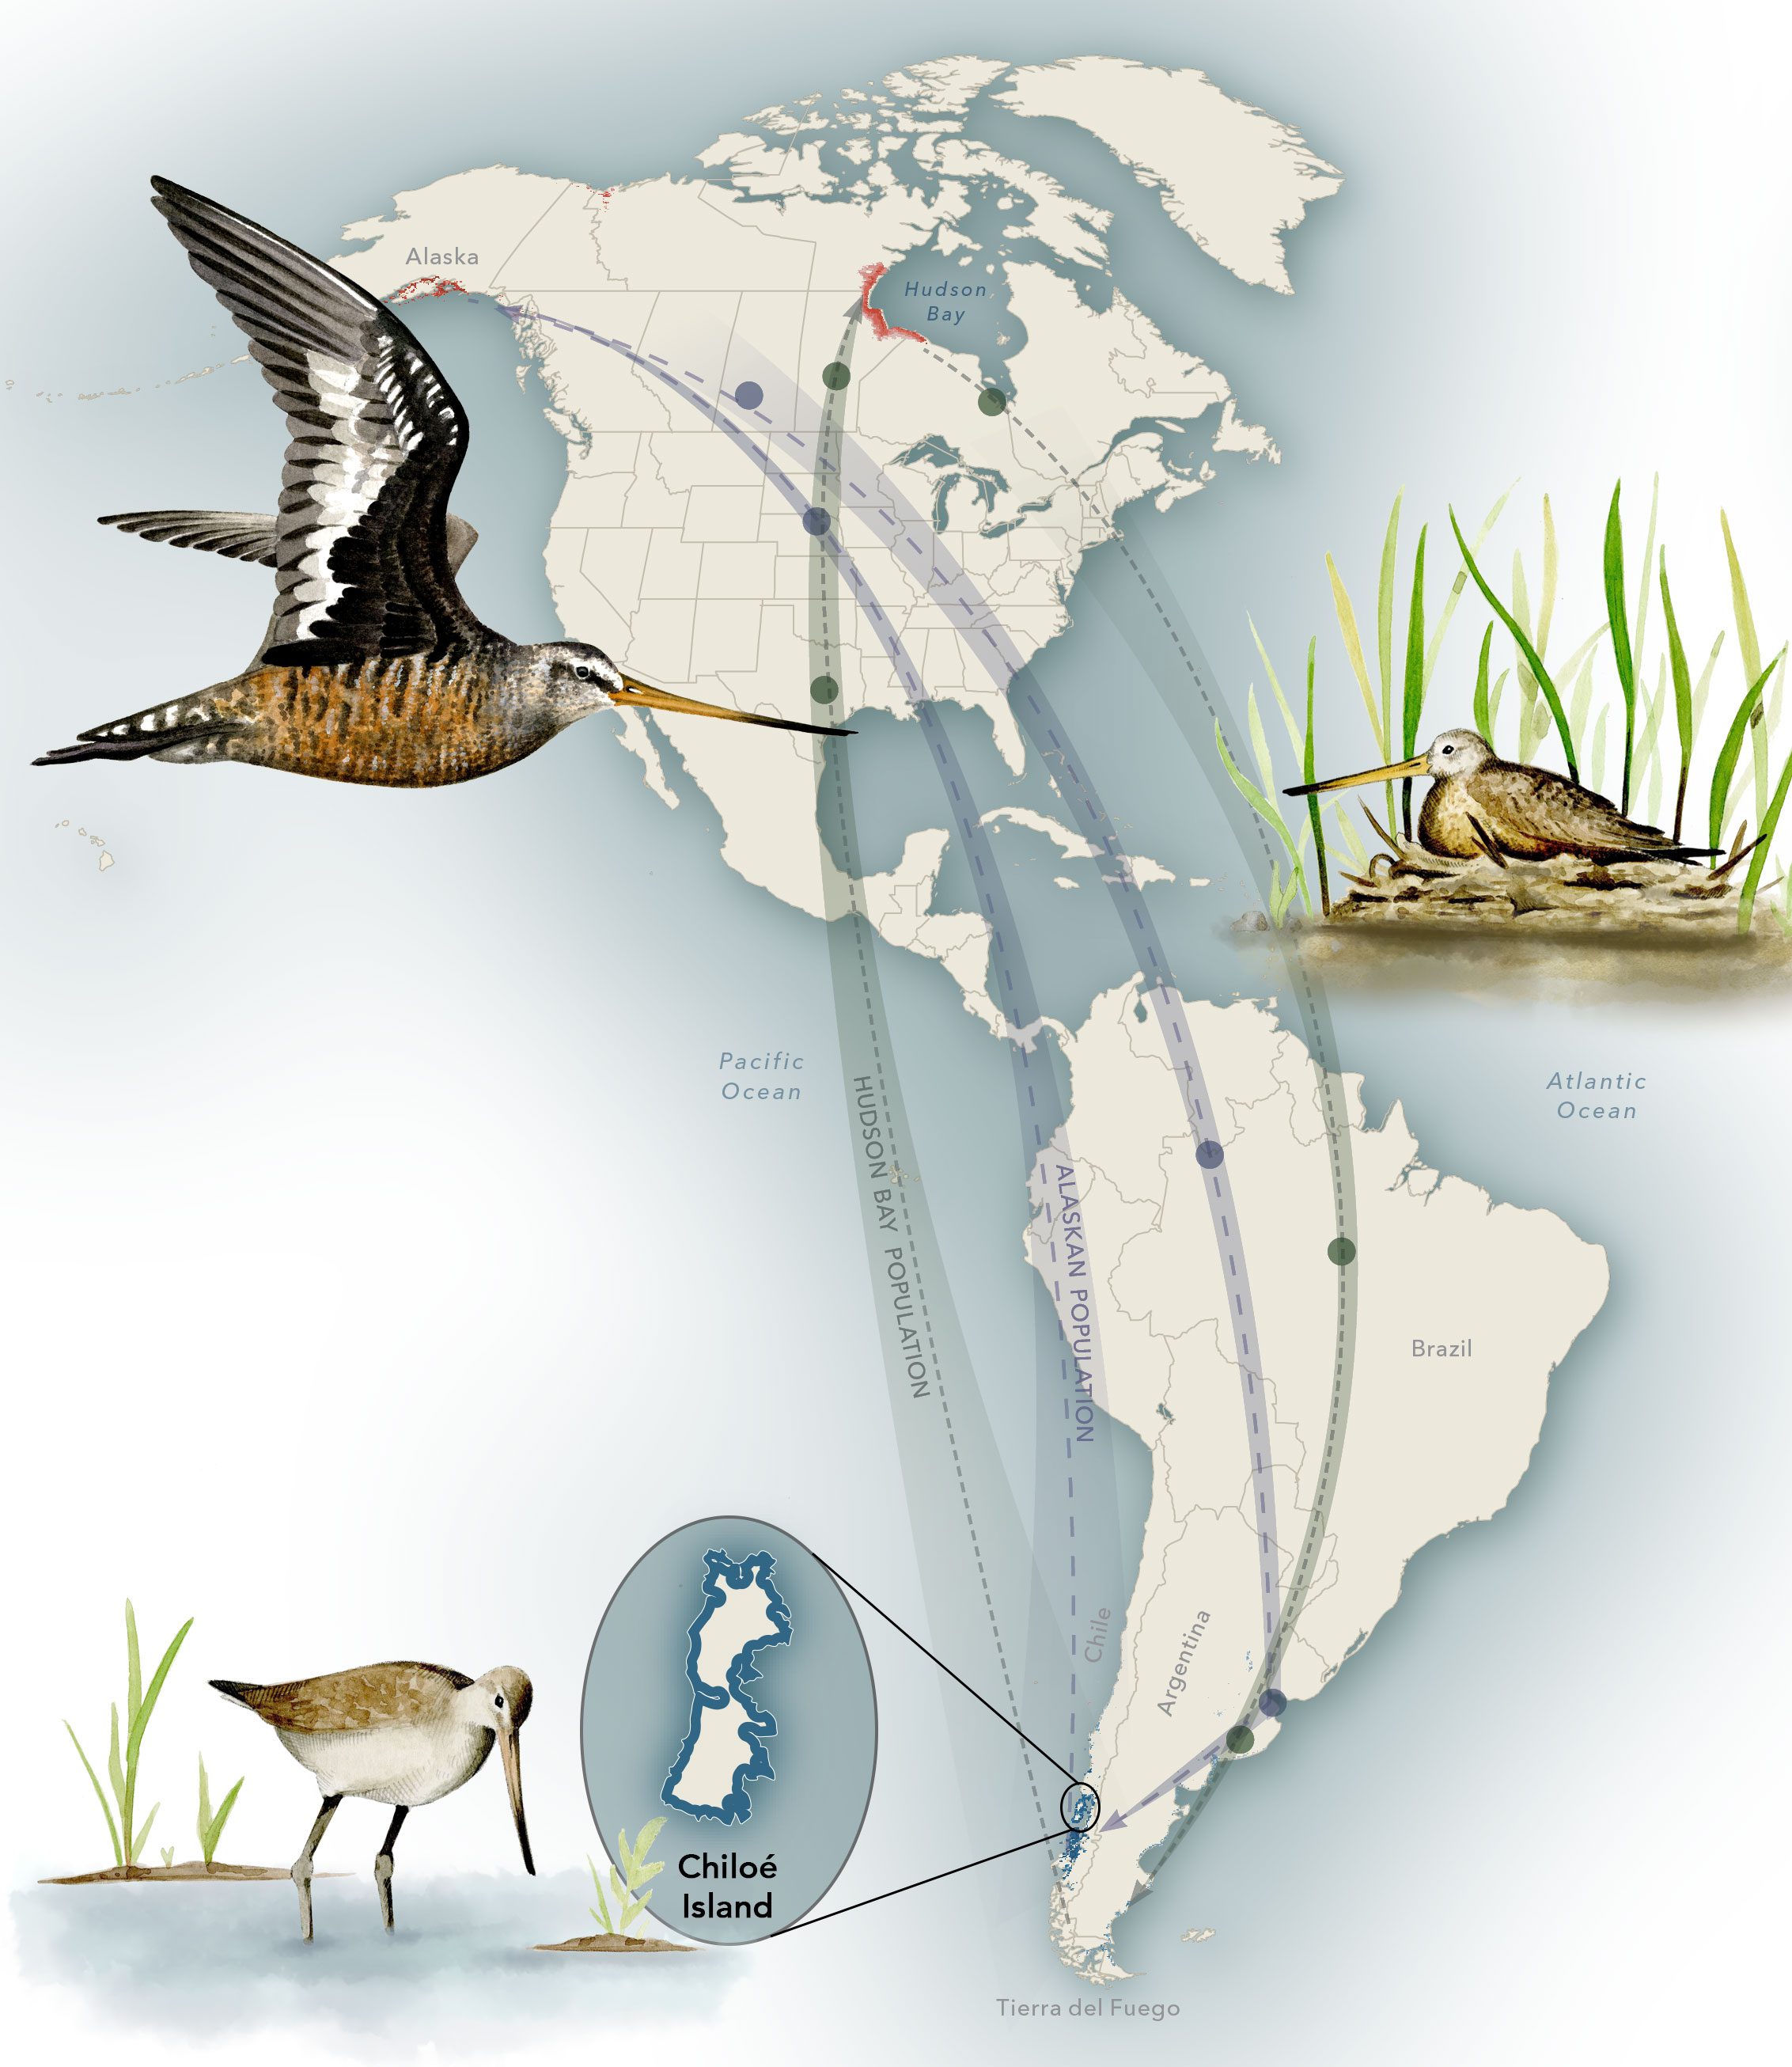 Hudsonian Godwit migration route. Top to bottom: a male flying in breeding plumage, a female on a nest, a male foraging in winter plumage. Illustration by Bartels Science Illustrator Megan Bishop.